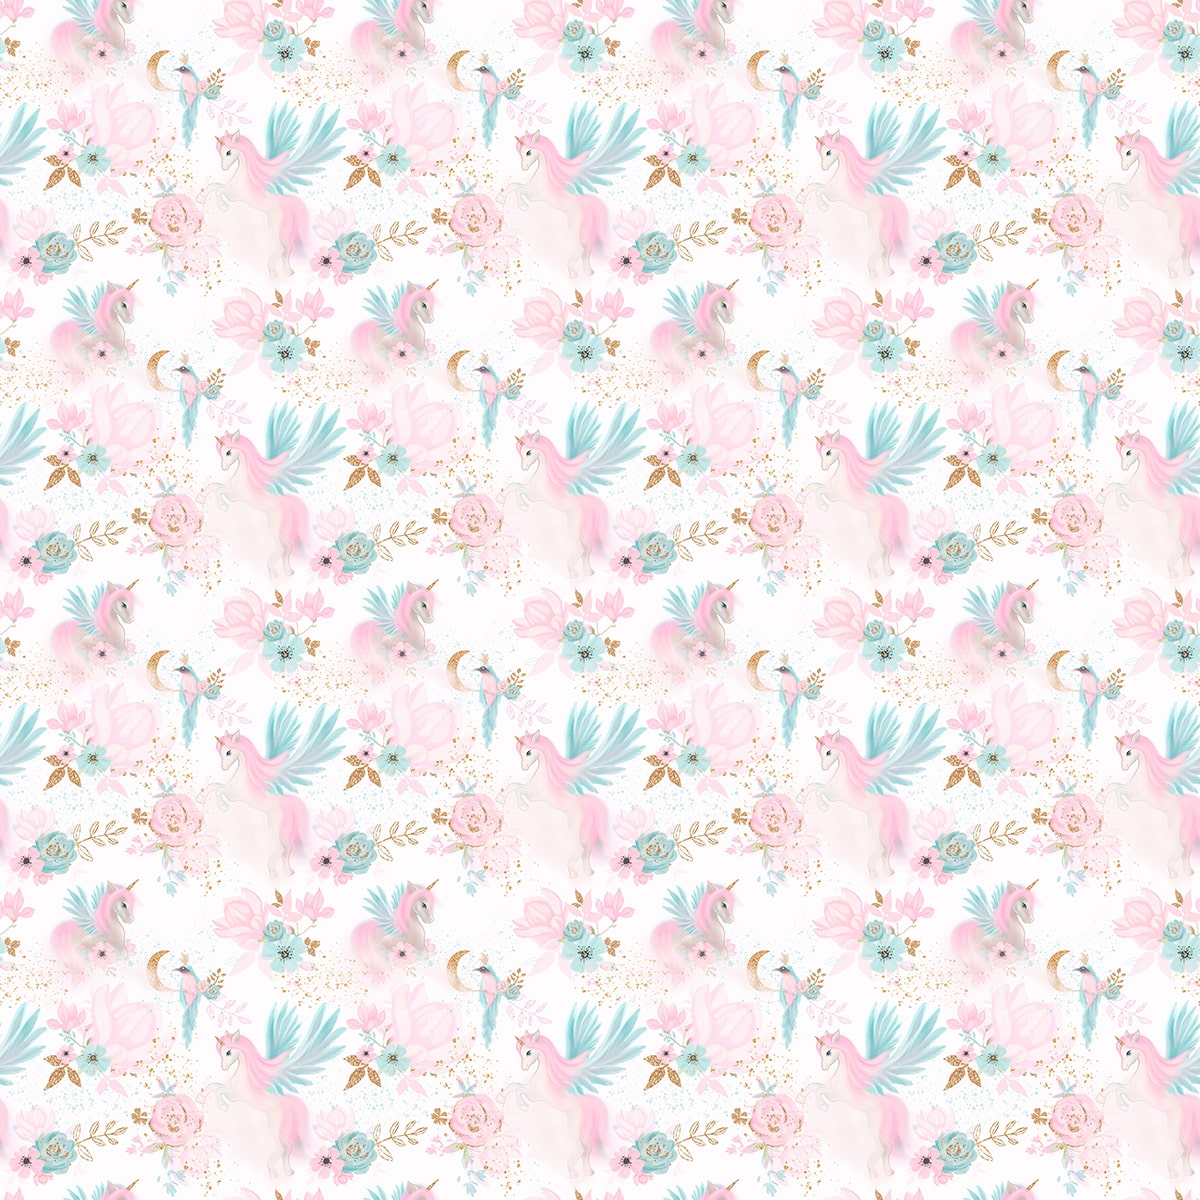 A pattern of flowers and unicorns